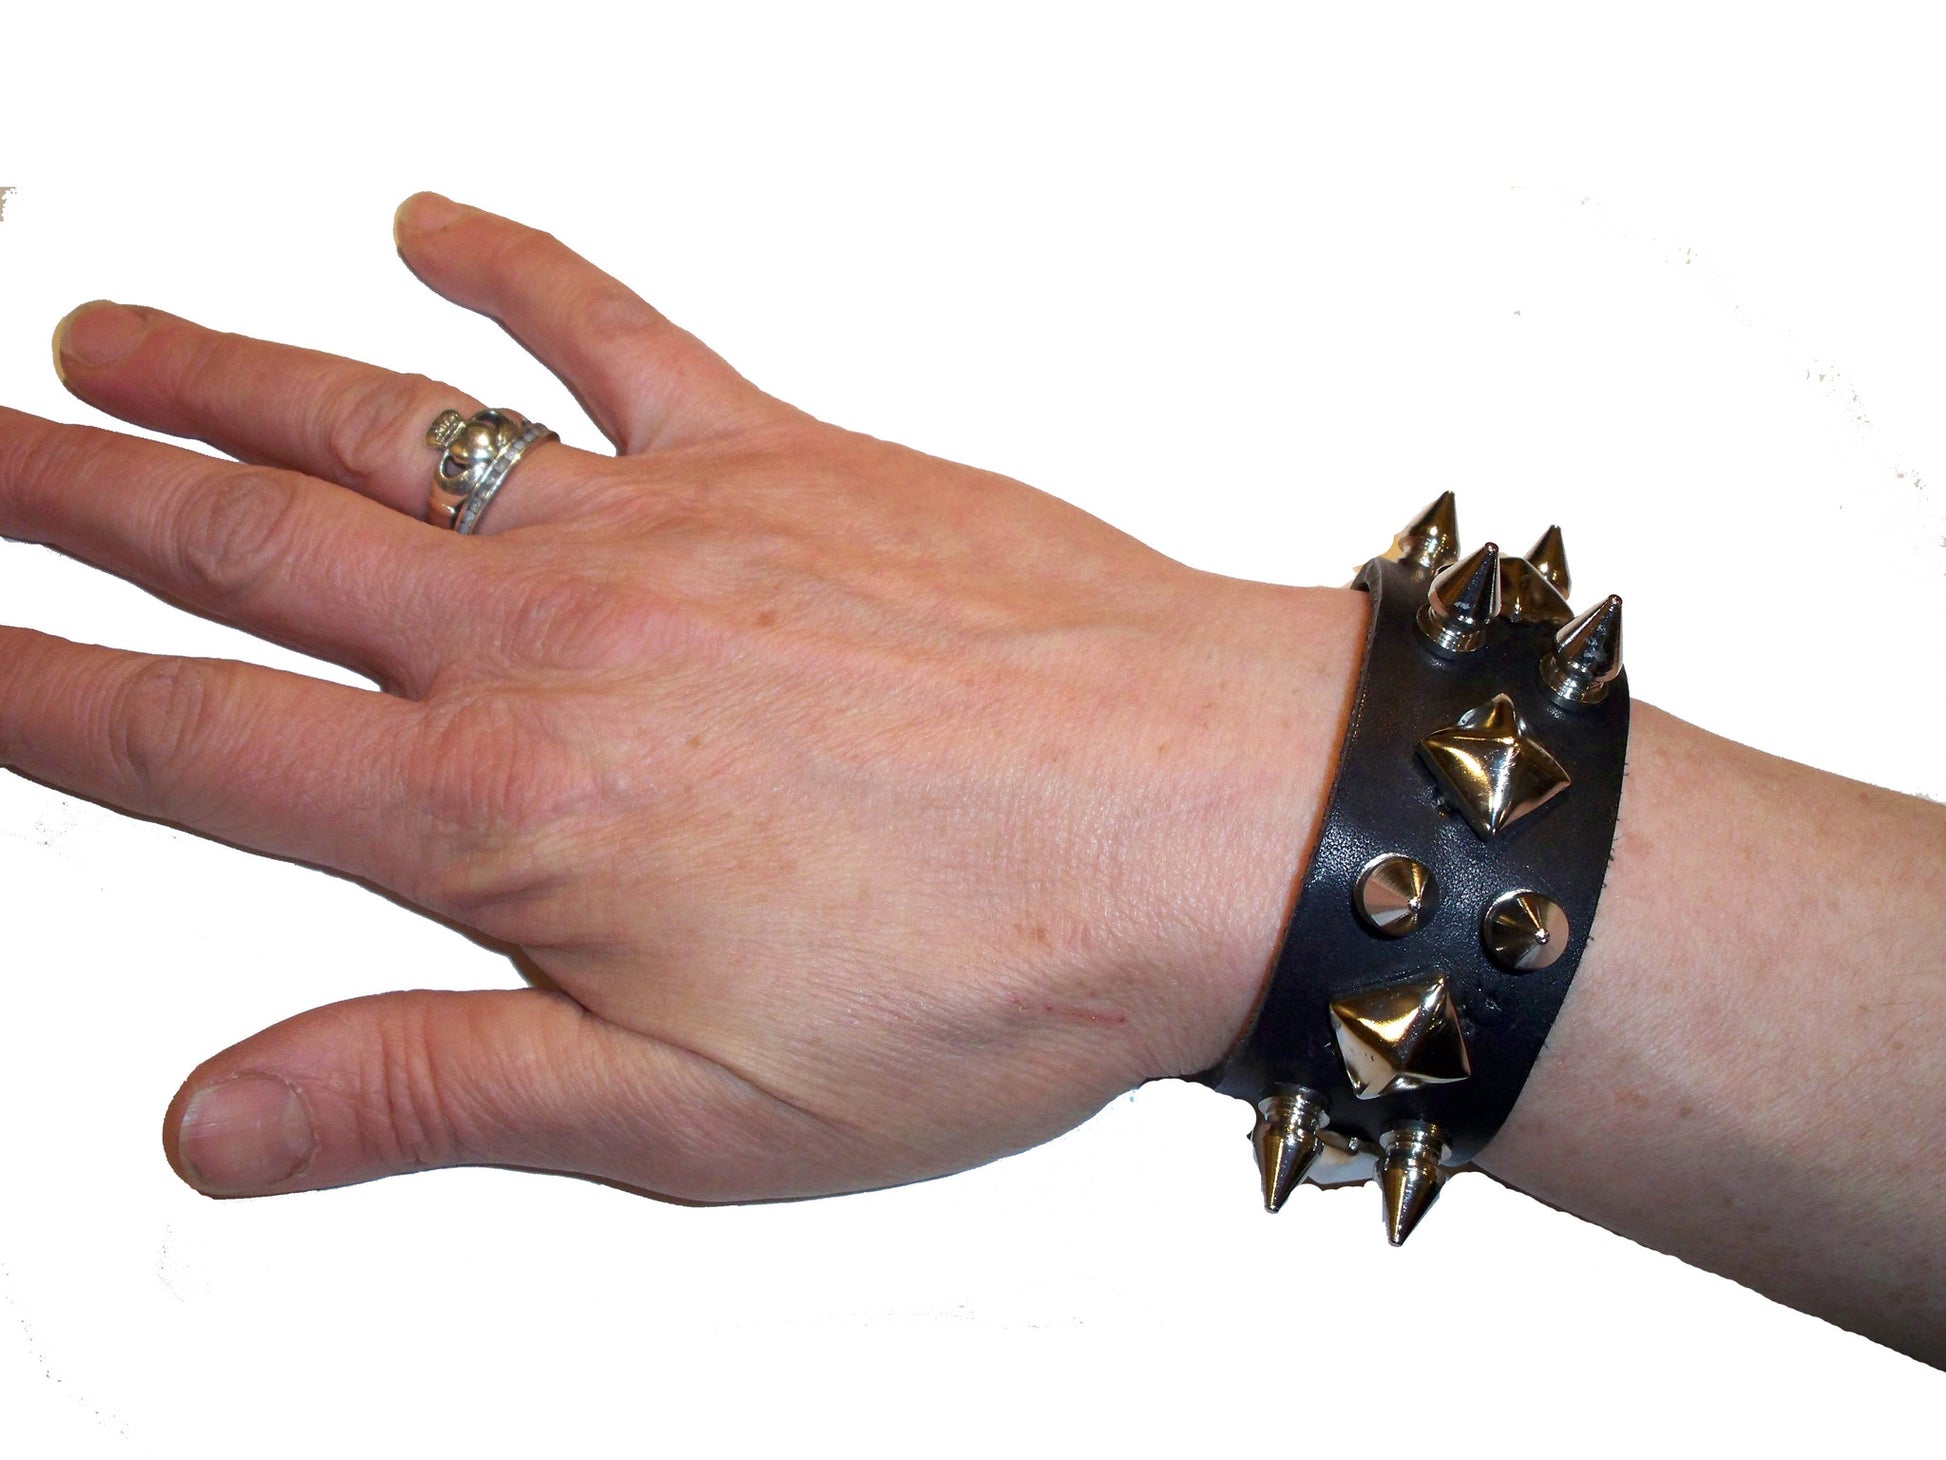 Equillibrium Accessories: Up-cycled Leather Spiked Cuff Bracelet